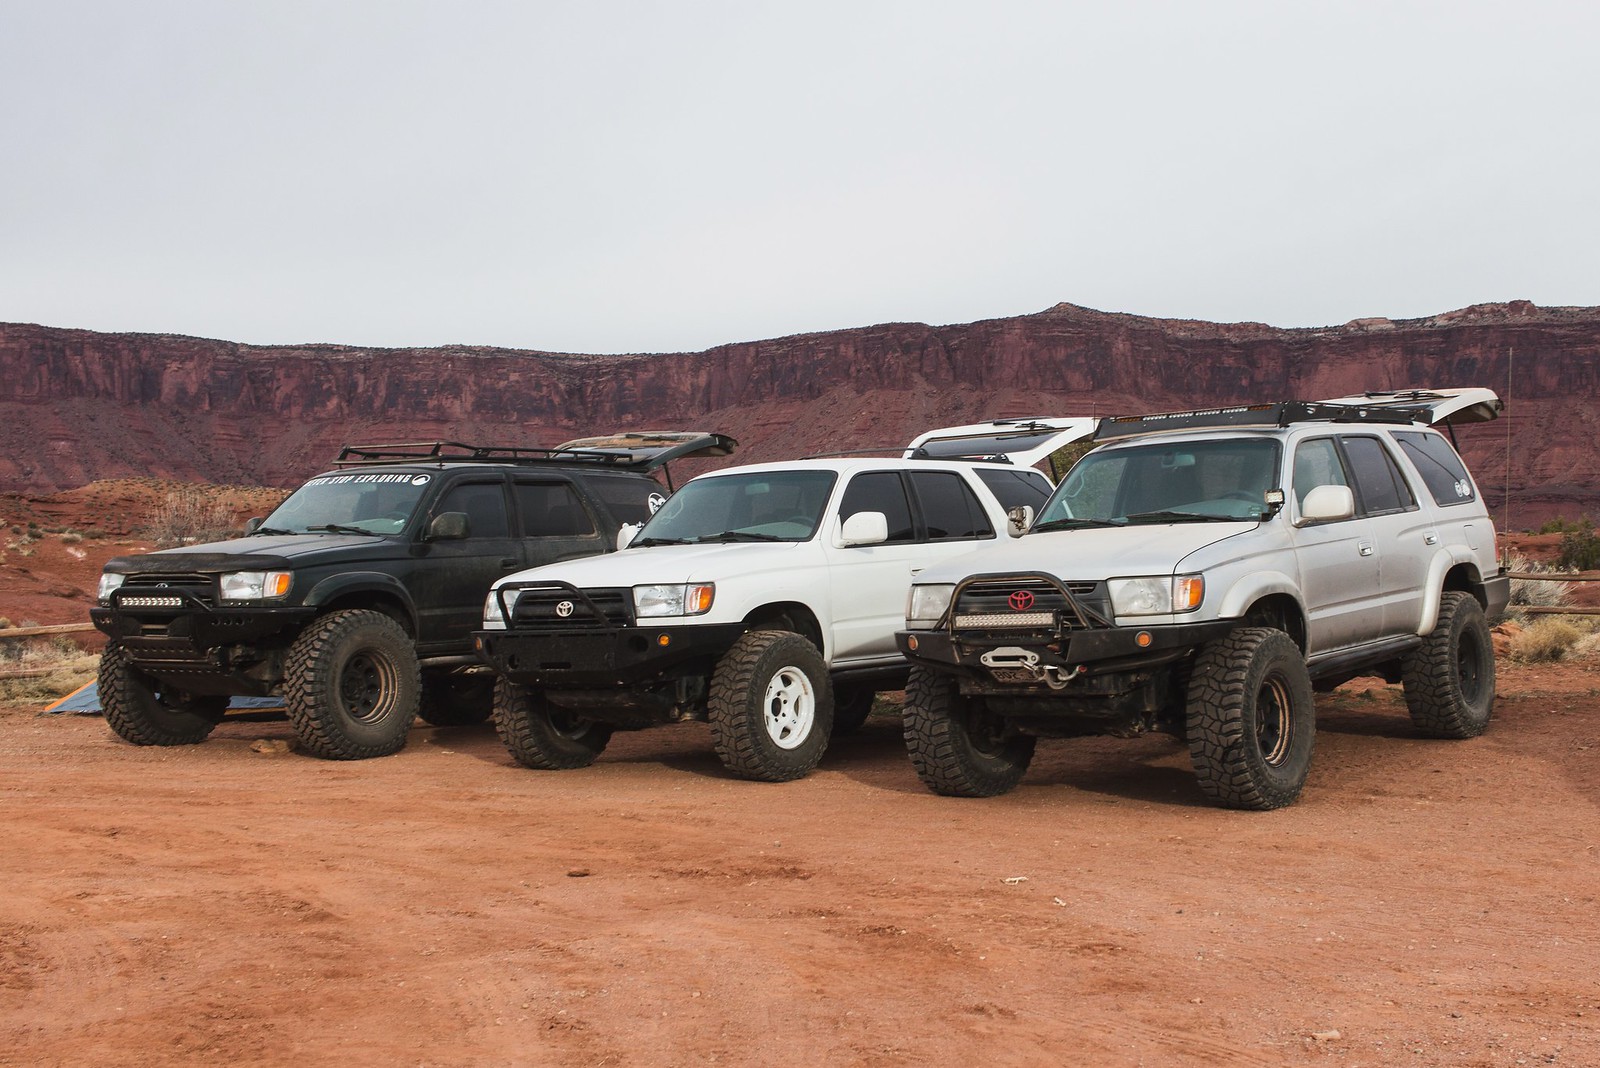 Official 3rd gen 4Runners on 37's Pic Thread - Page 2 - Toyota 4Runner.